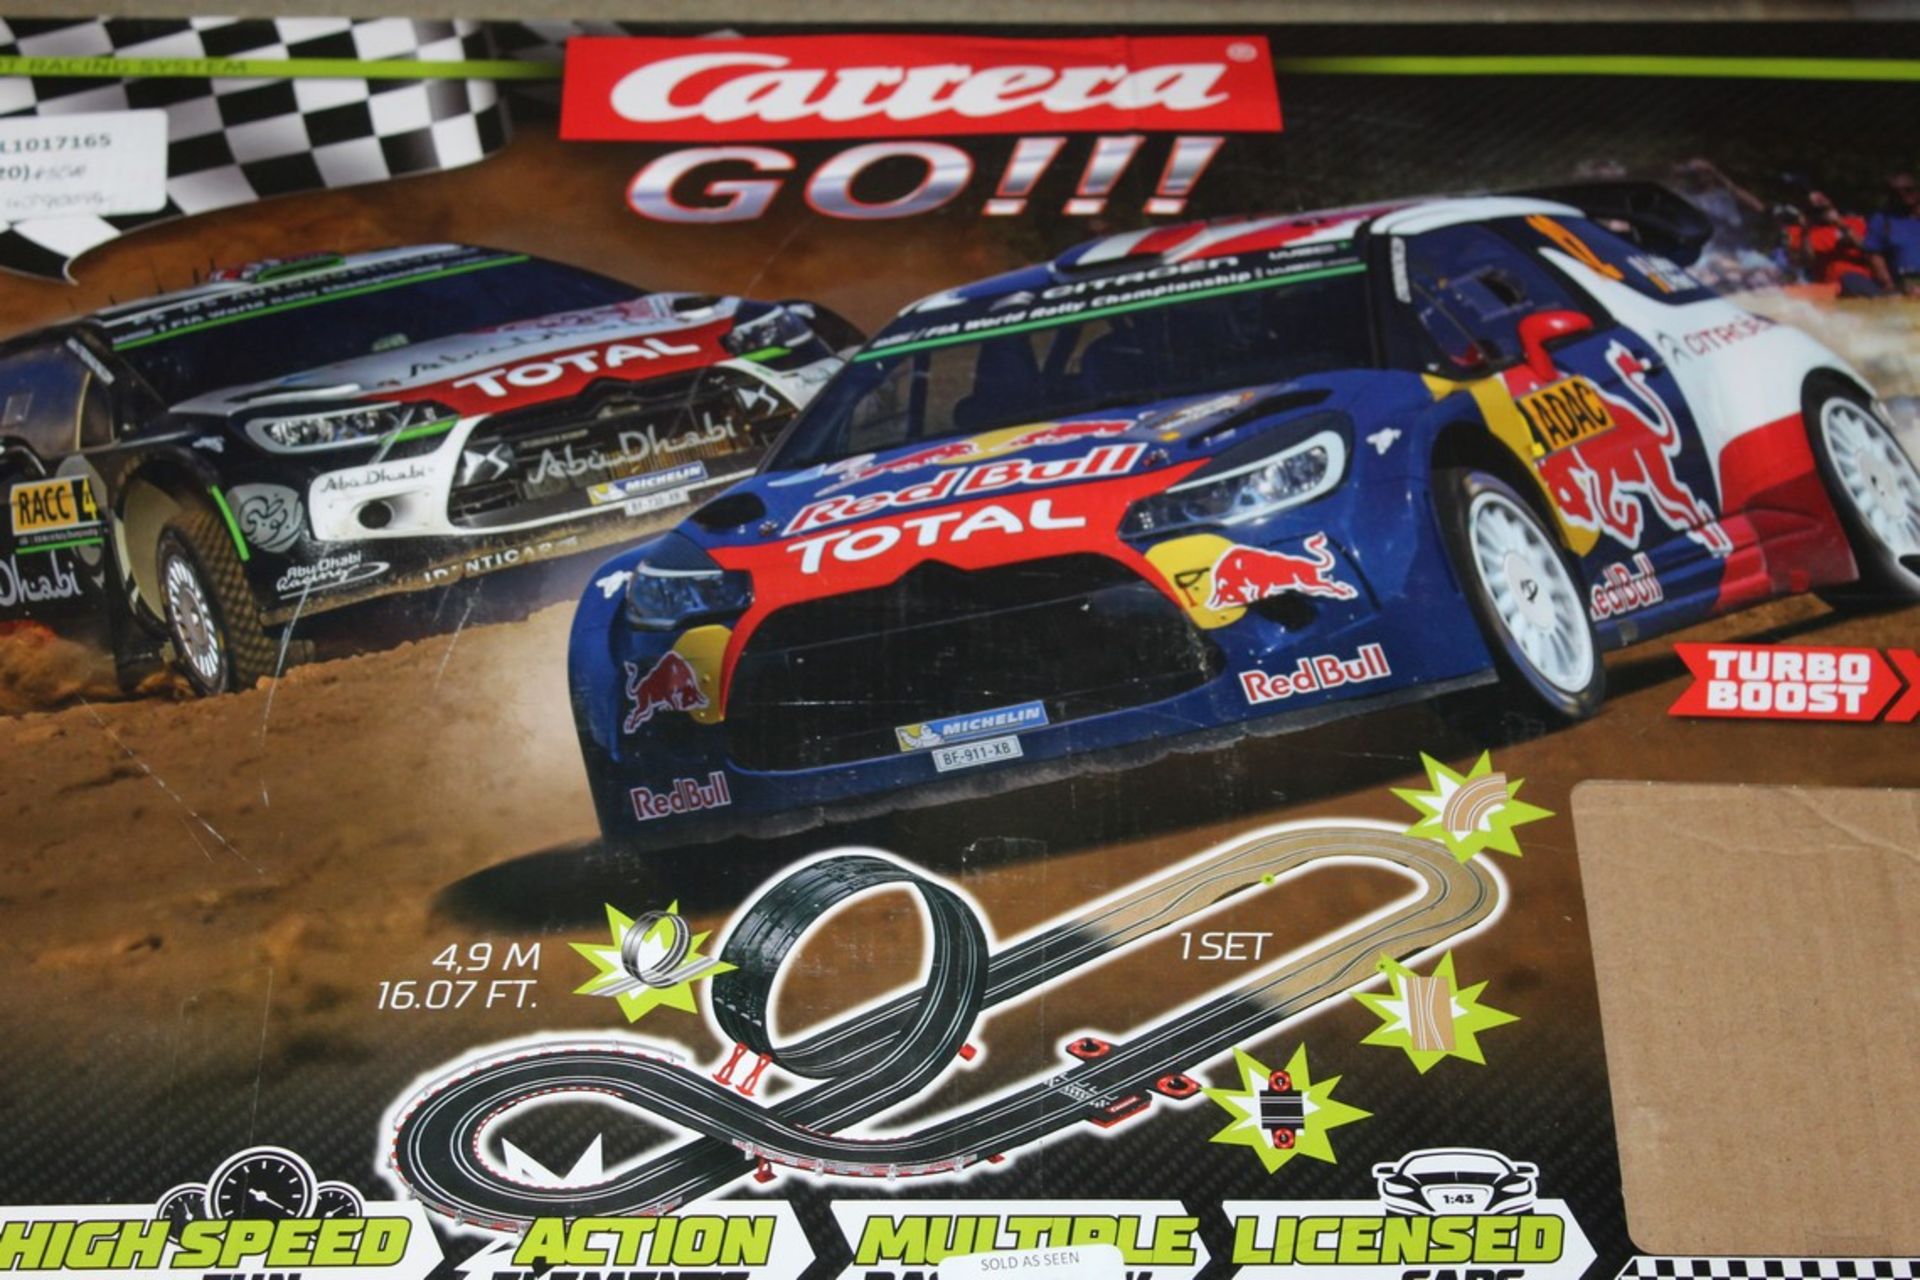 Boxed Carrera Go Super Rally Scalextric Set RRP £50 Each (4390694) (Public Viewing and Appraisals